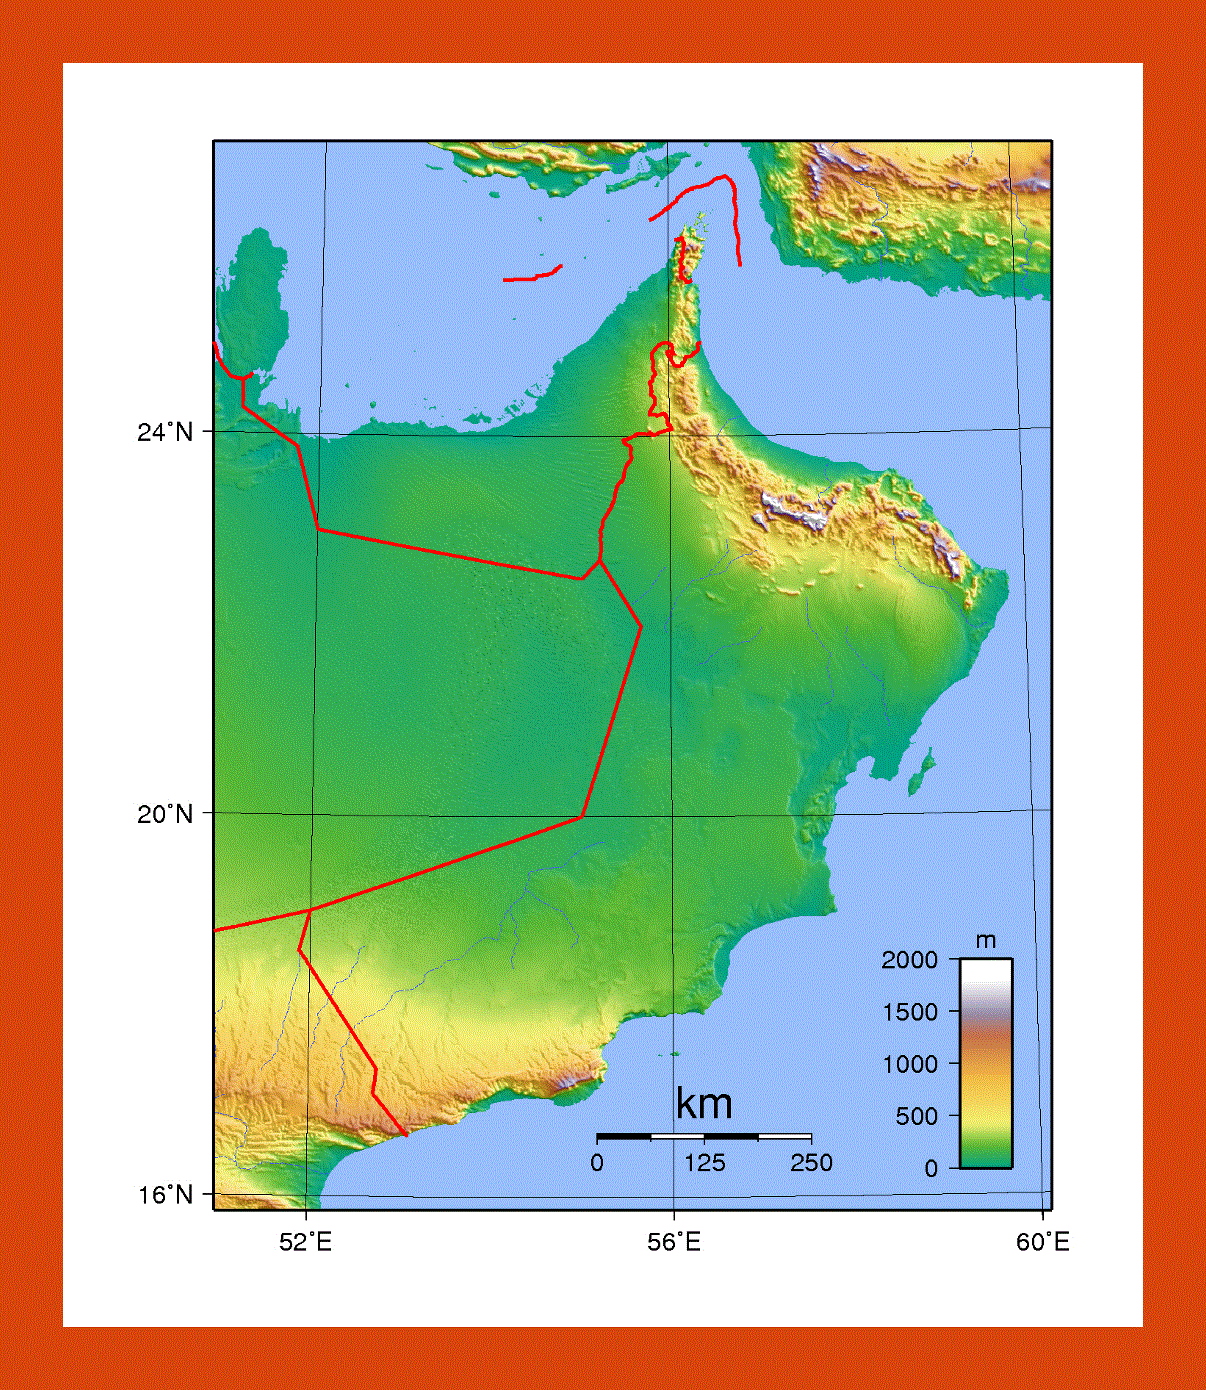 Topographical map of Oman